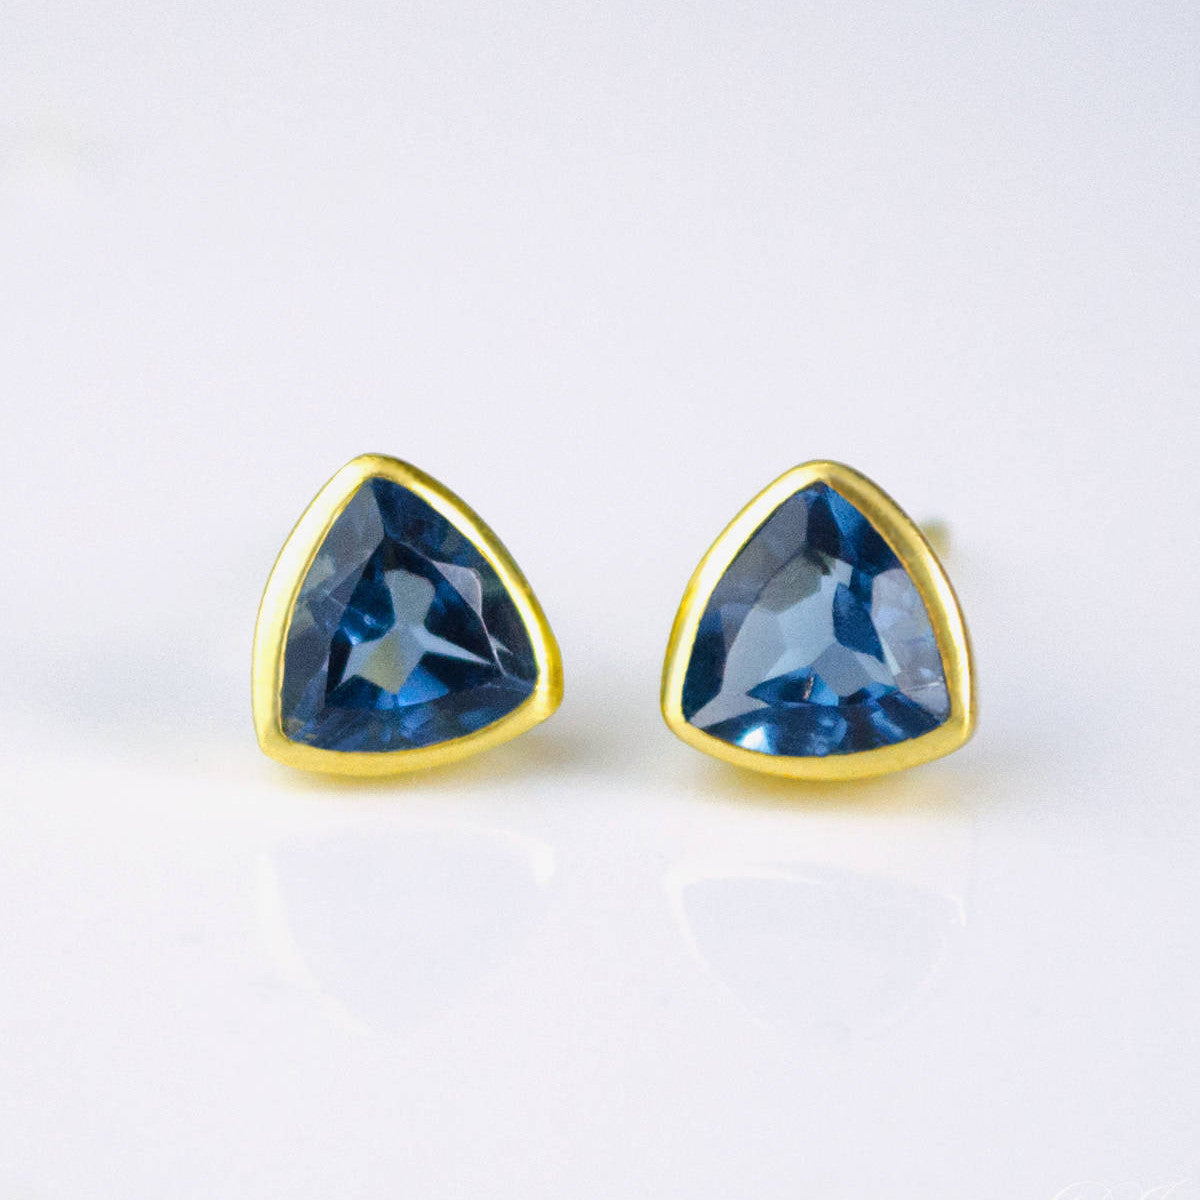 Small Kyanite Quartz Triangle Studs, Everyday Earrings - Danique Jewelry